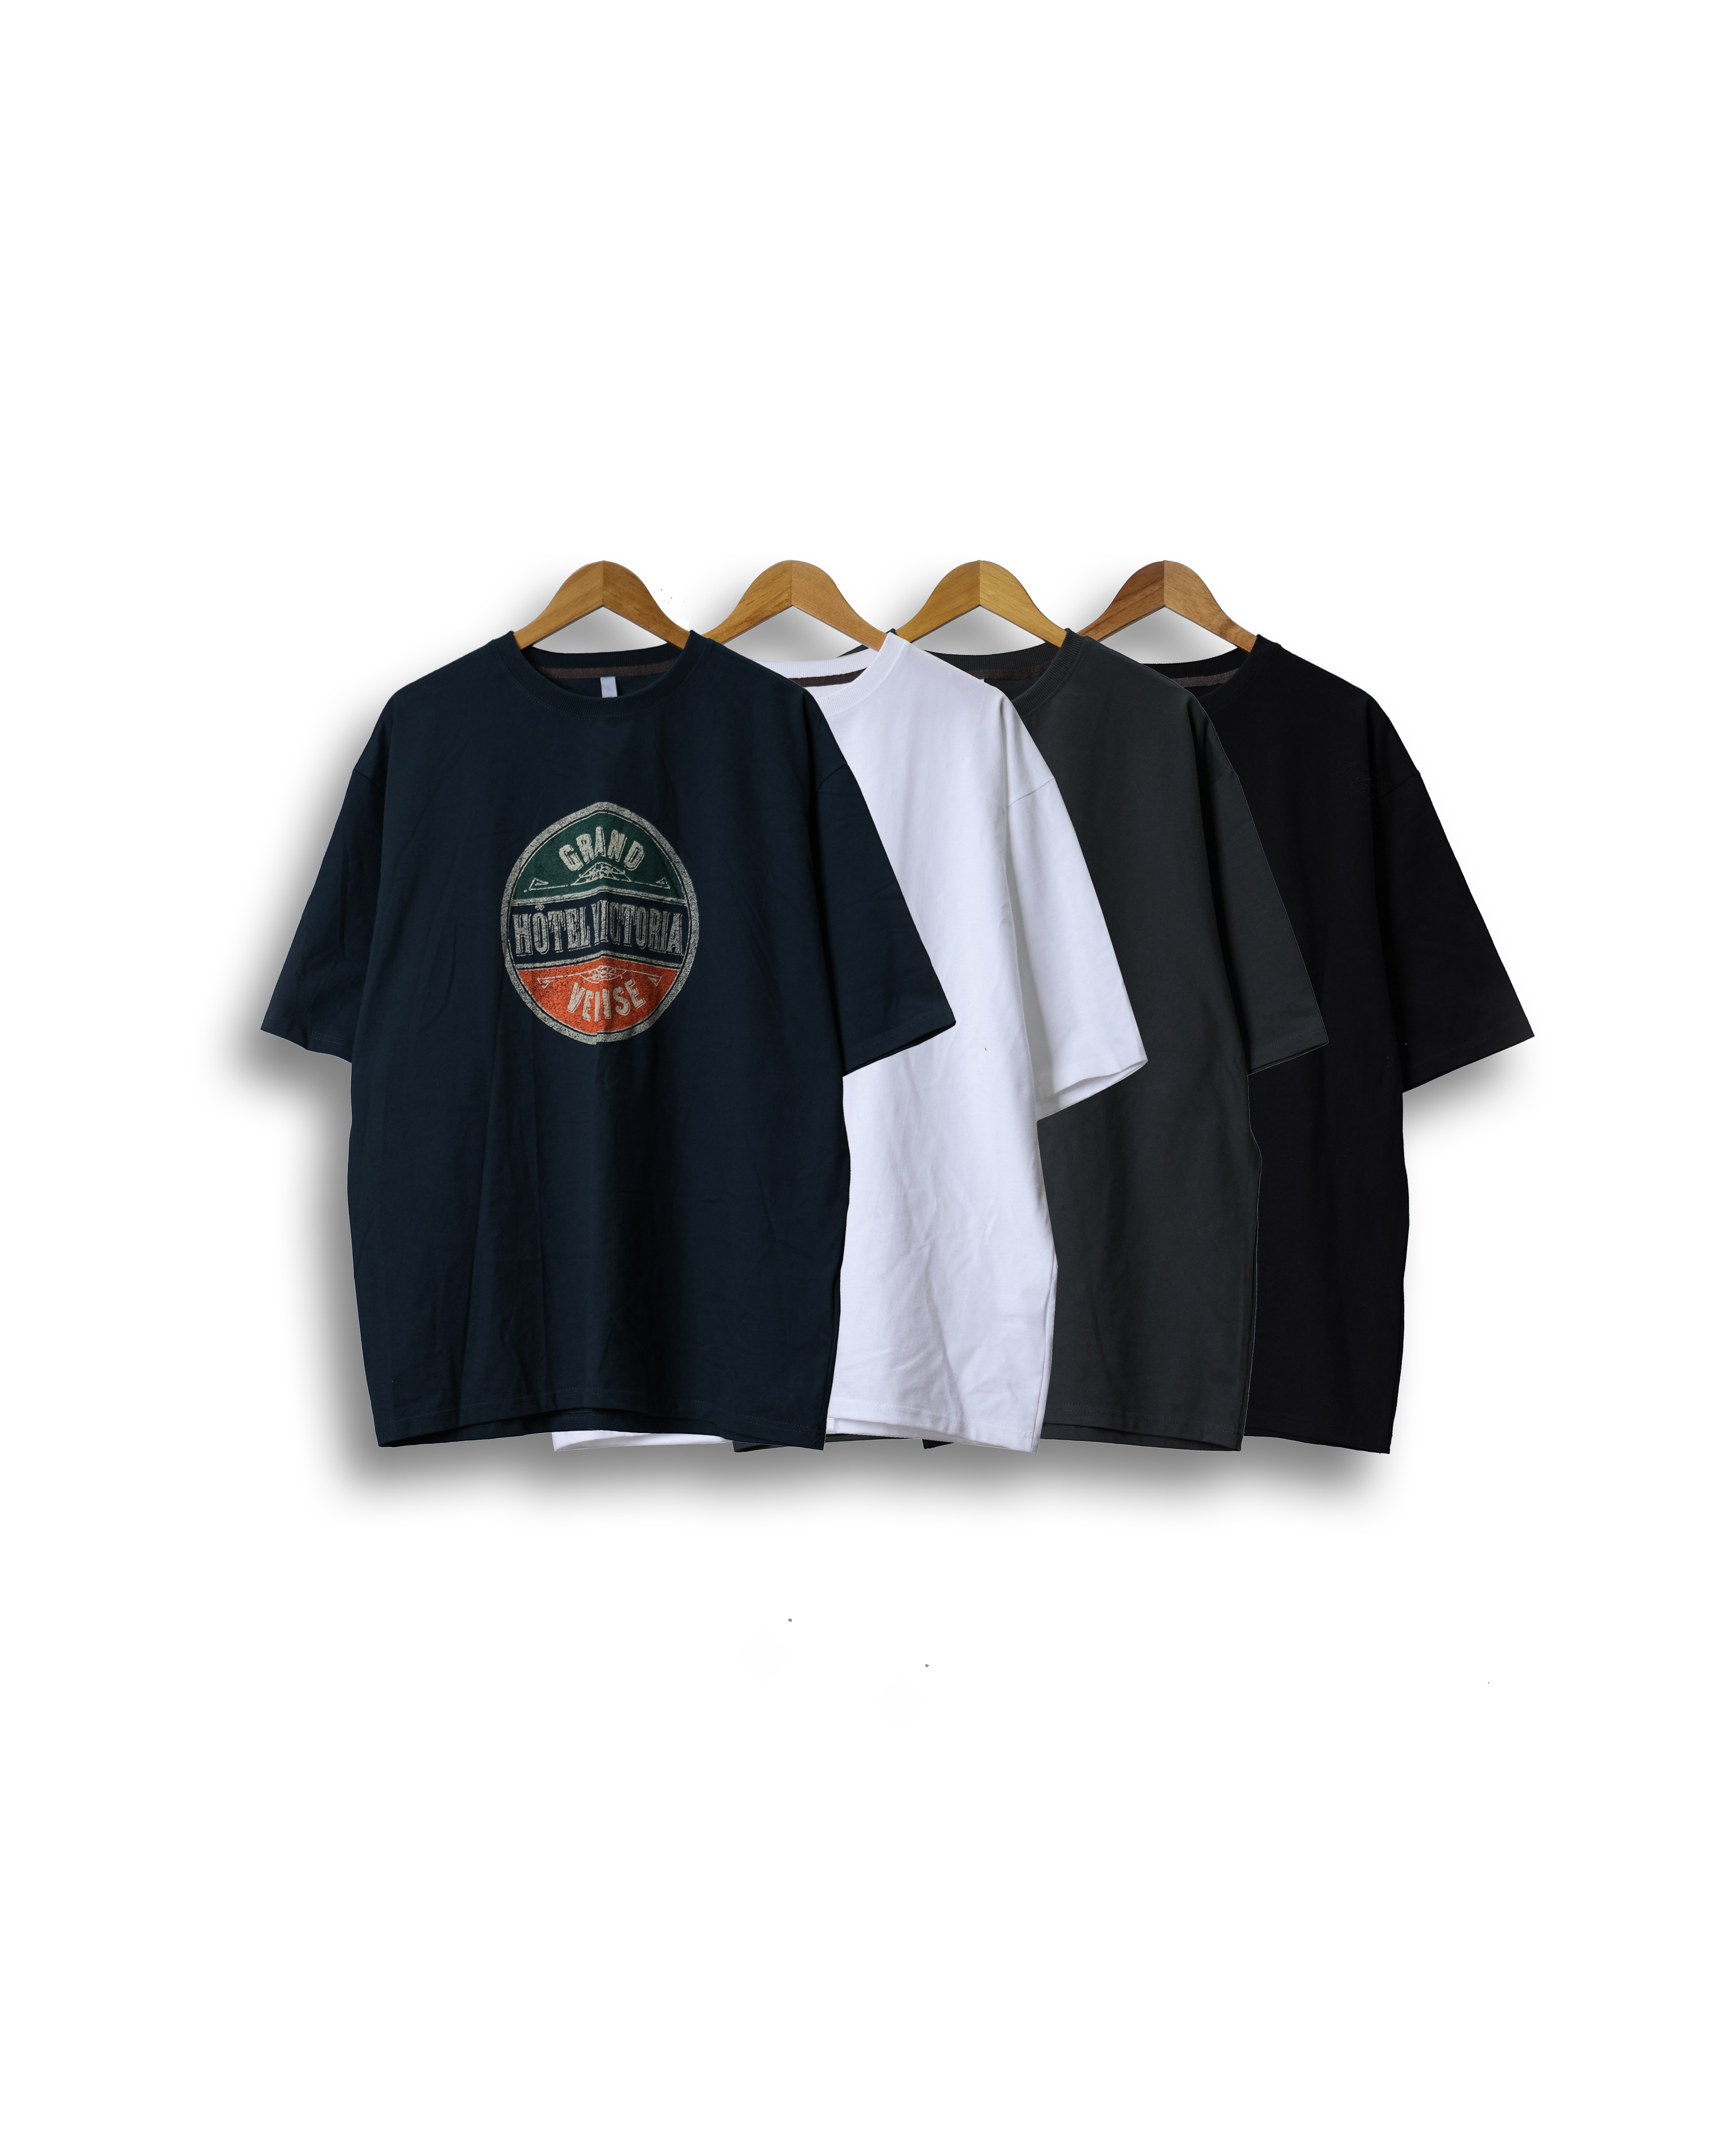 OTHER Victoria Hotel Vintage Over T Shirts (Black/Charcoal/Navy/White)